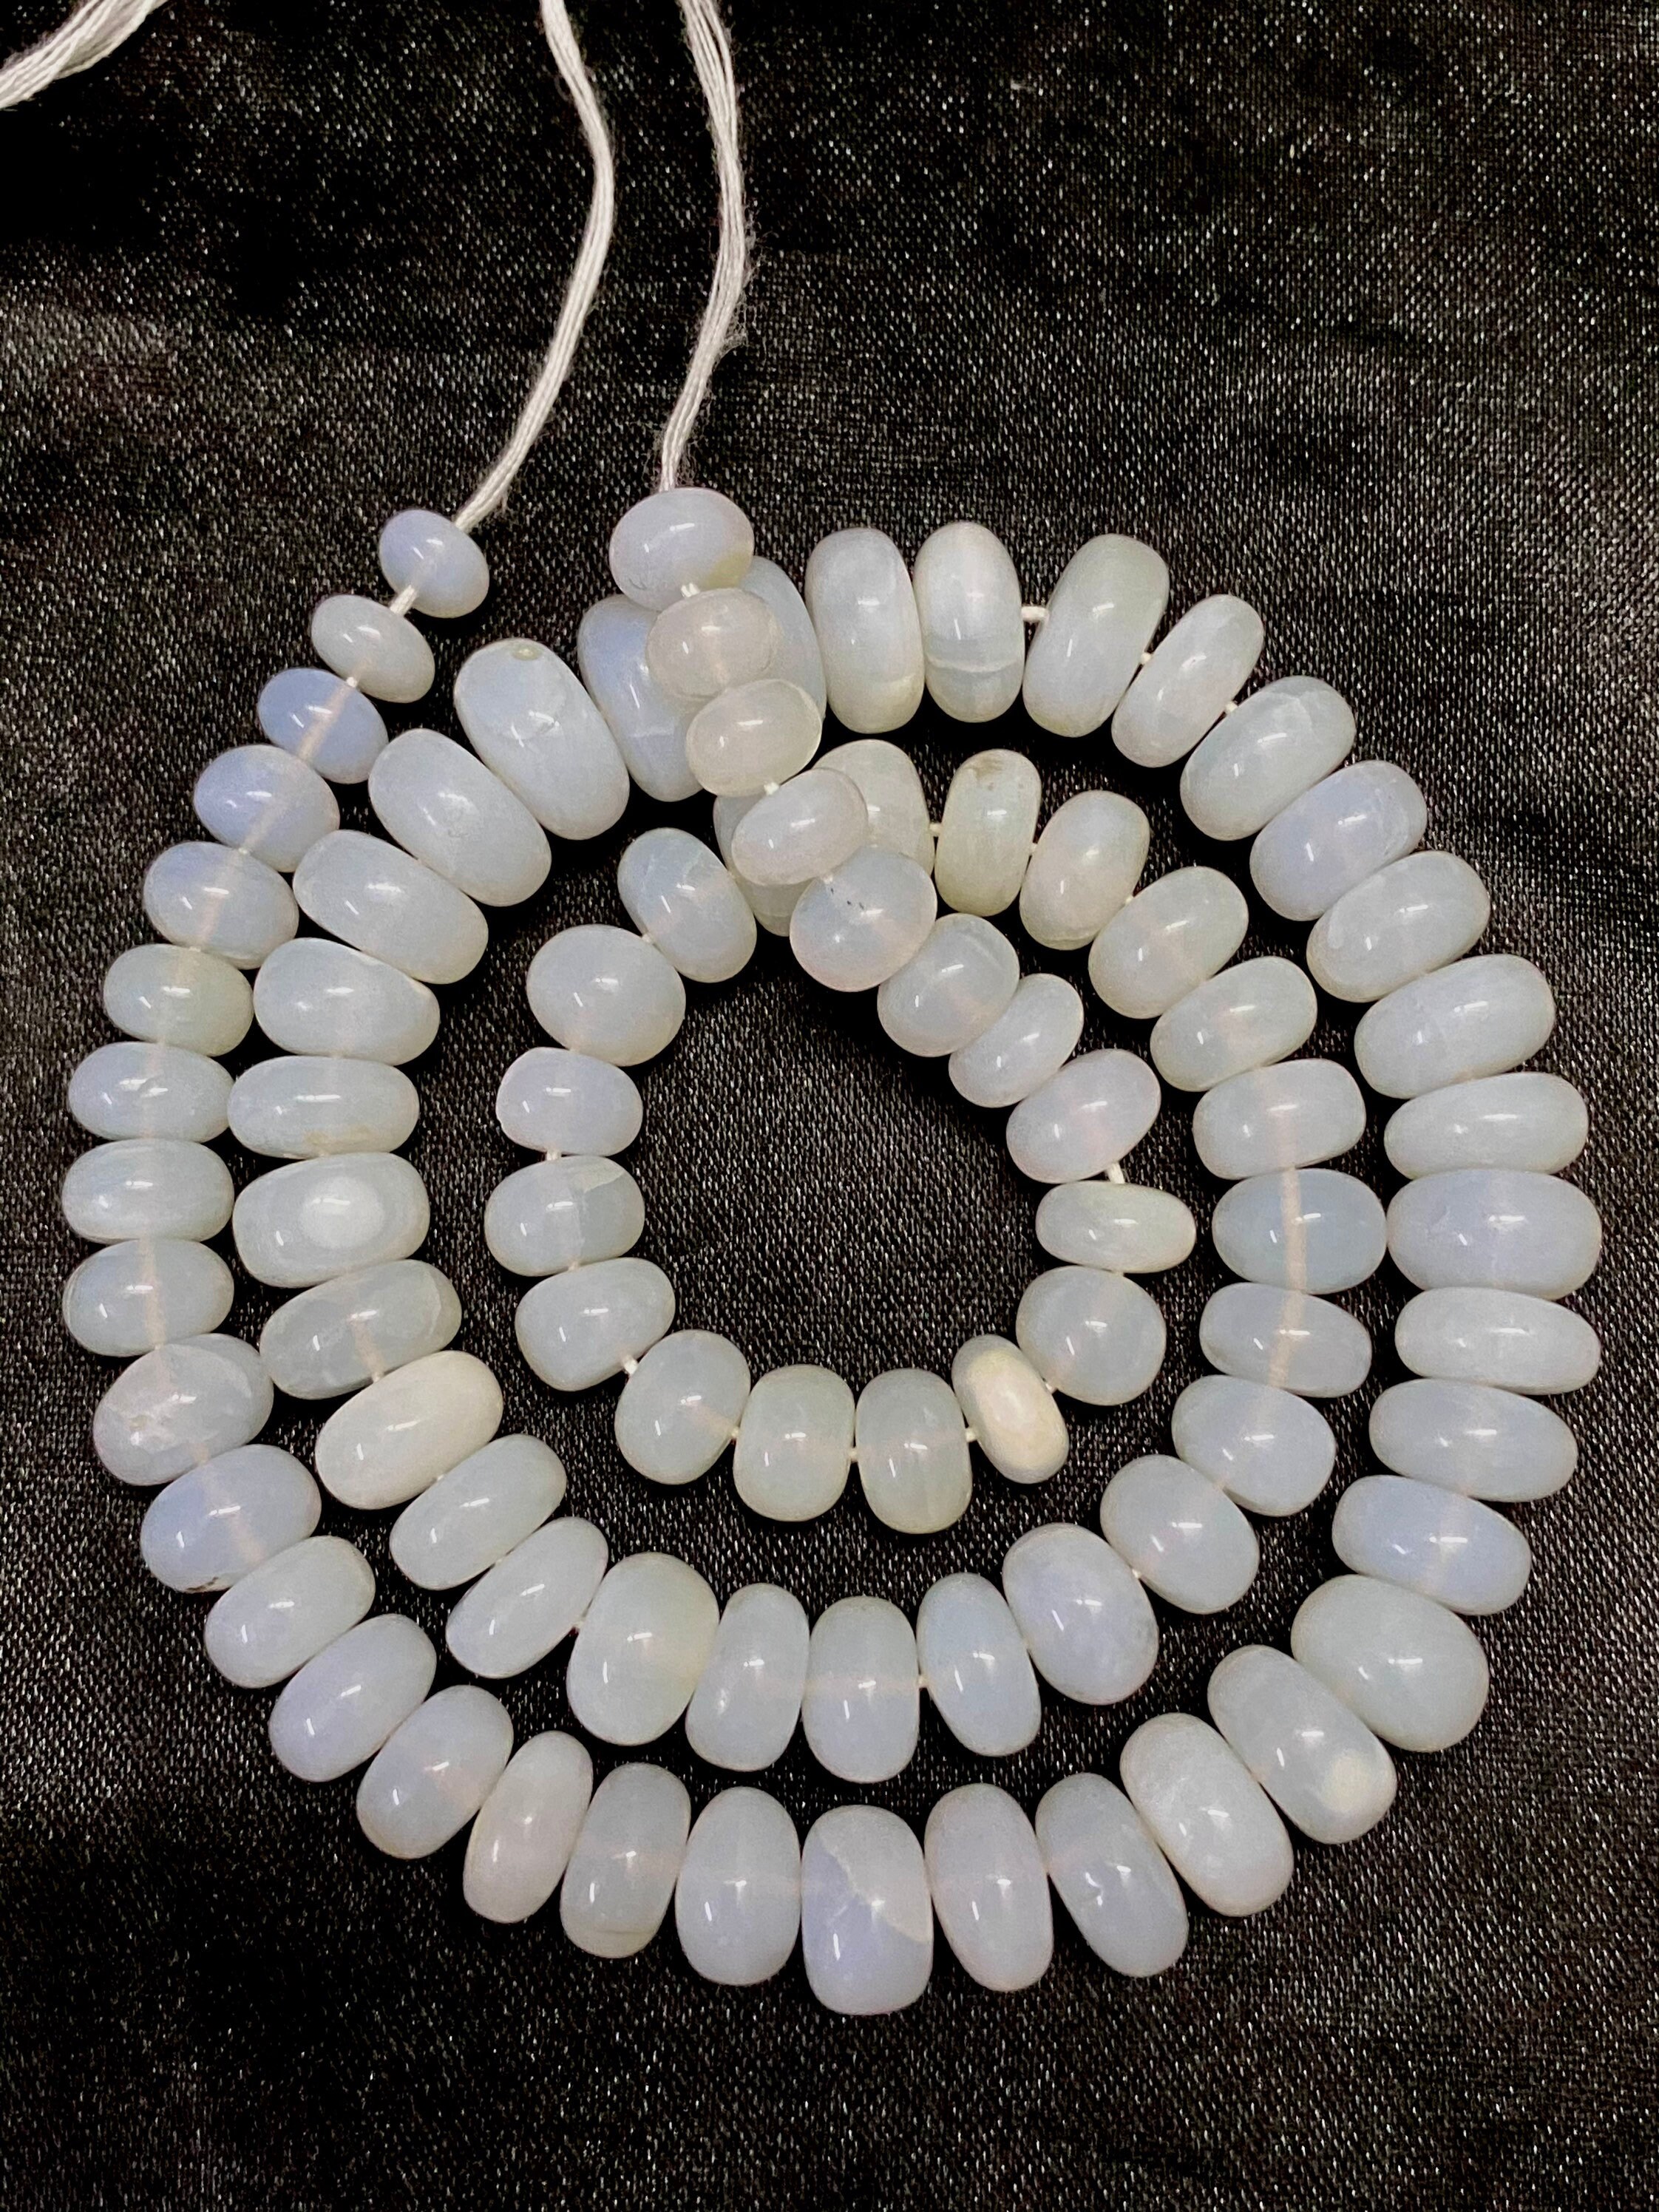 10MM White Opal Beads (200 pieces)